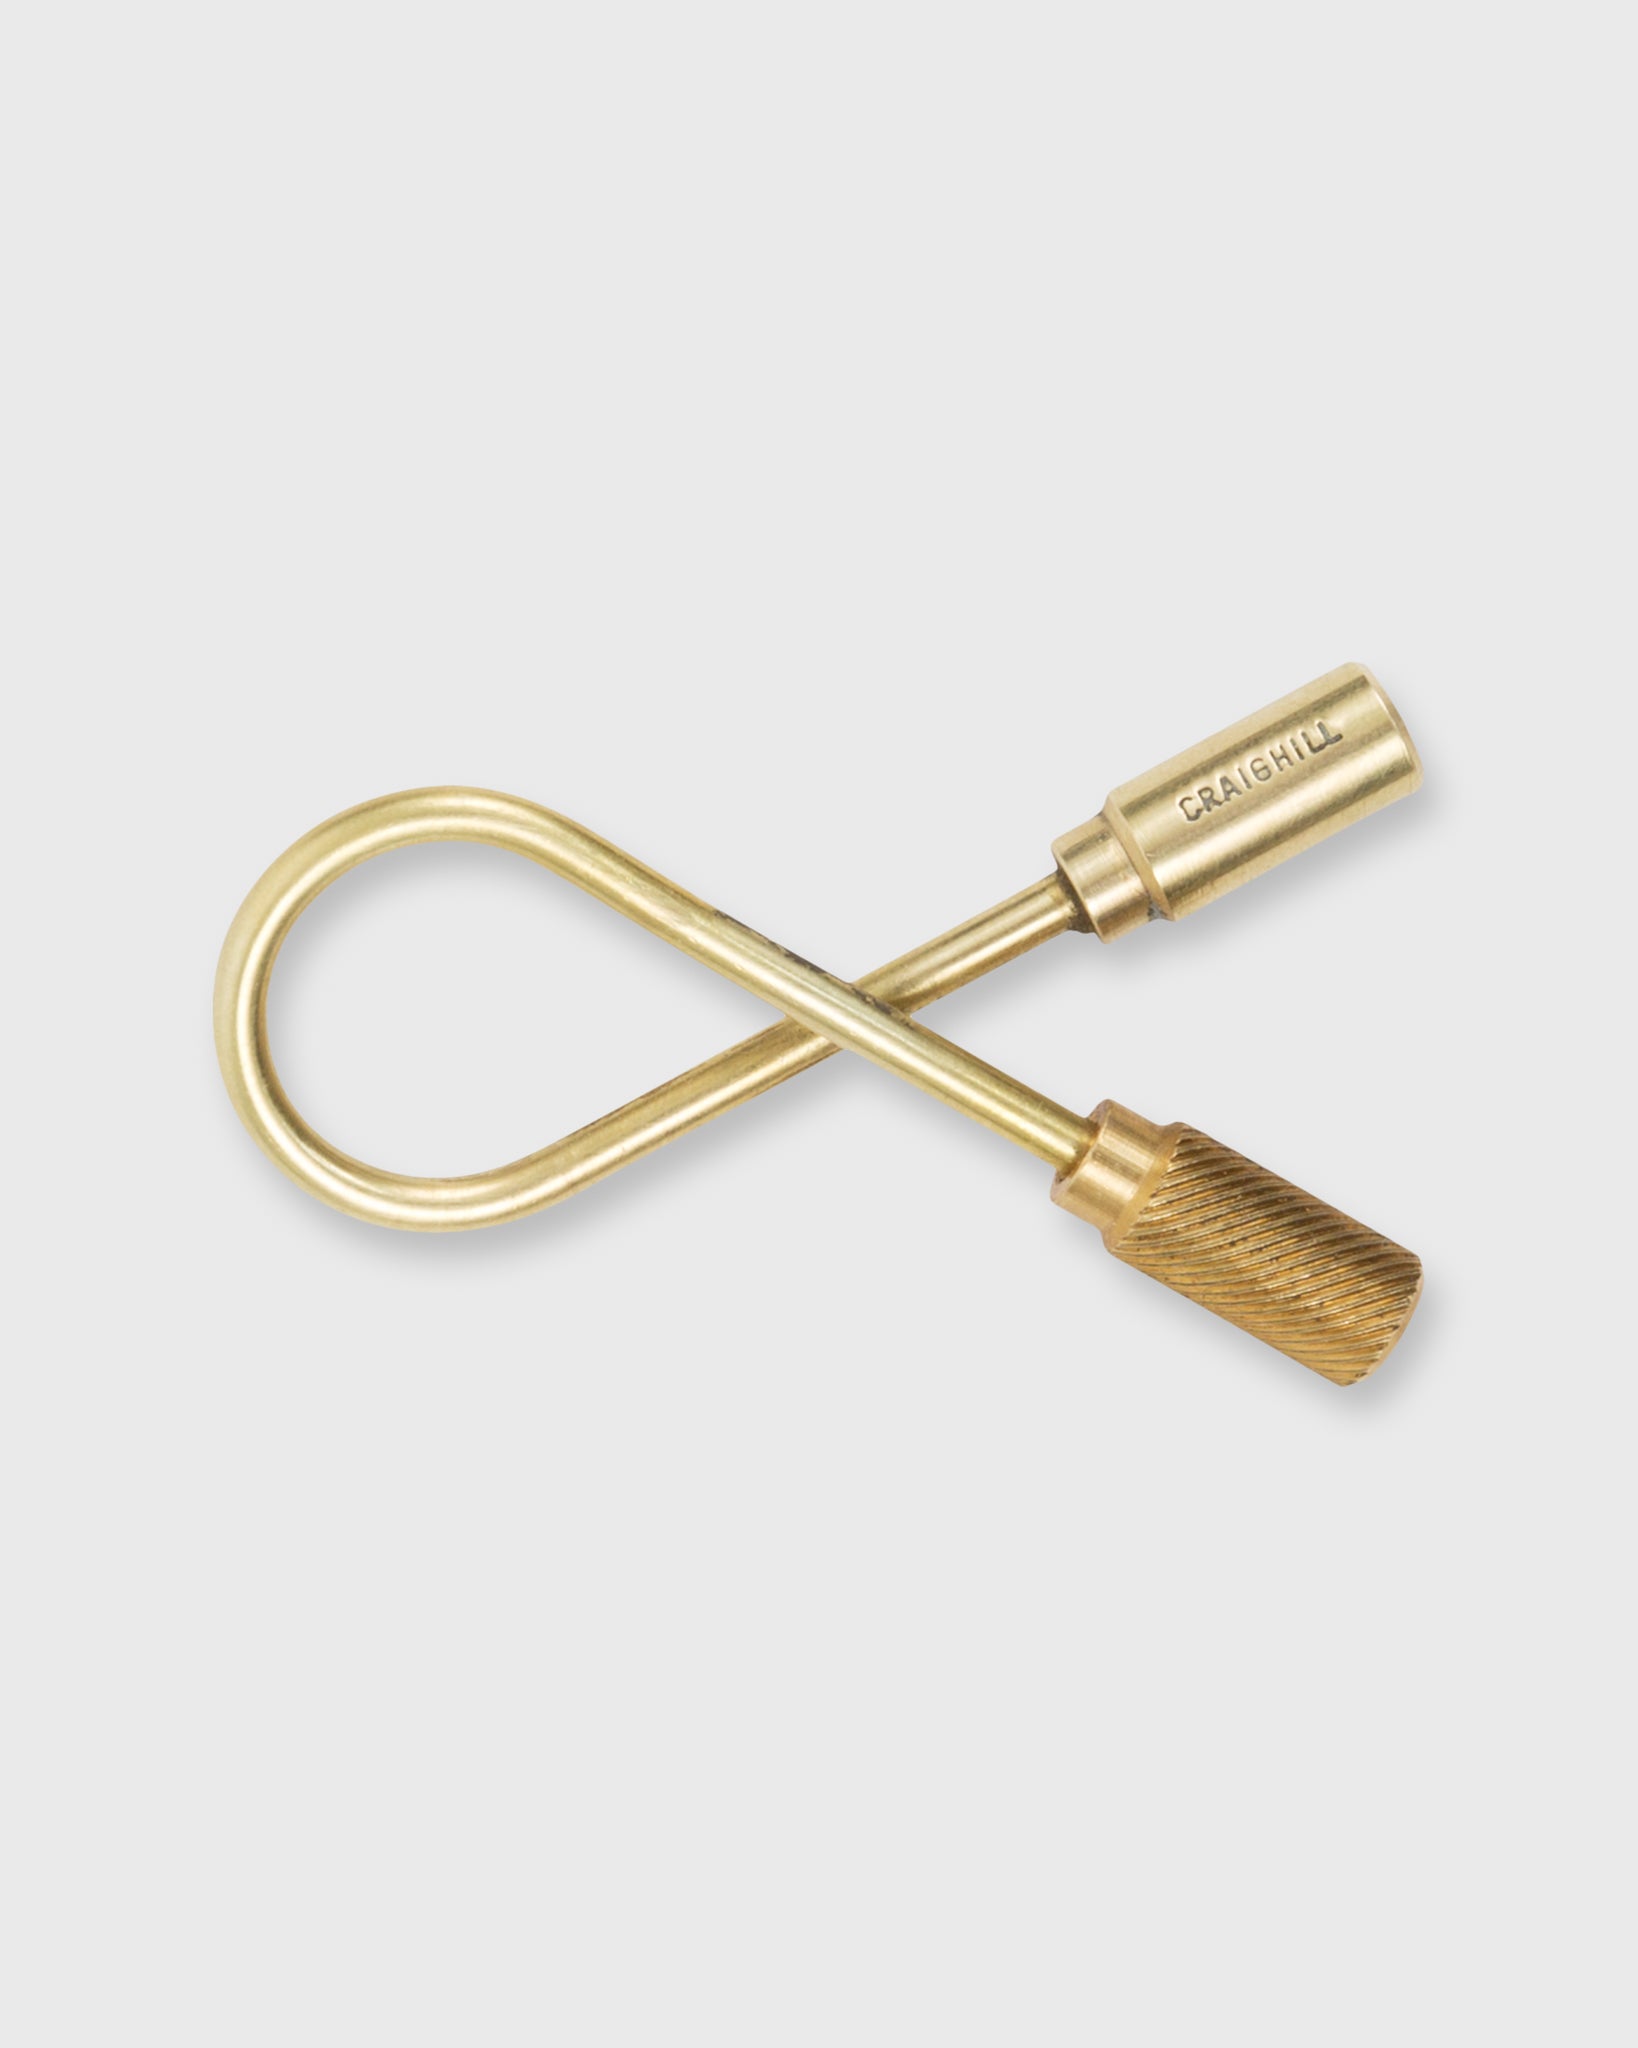 Closed Helix Key Ring Brass